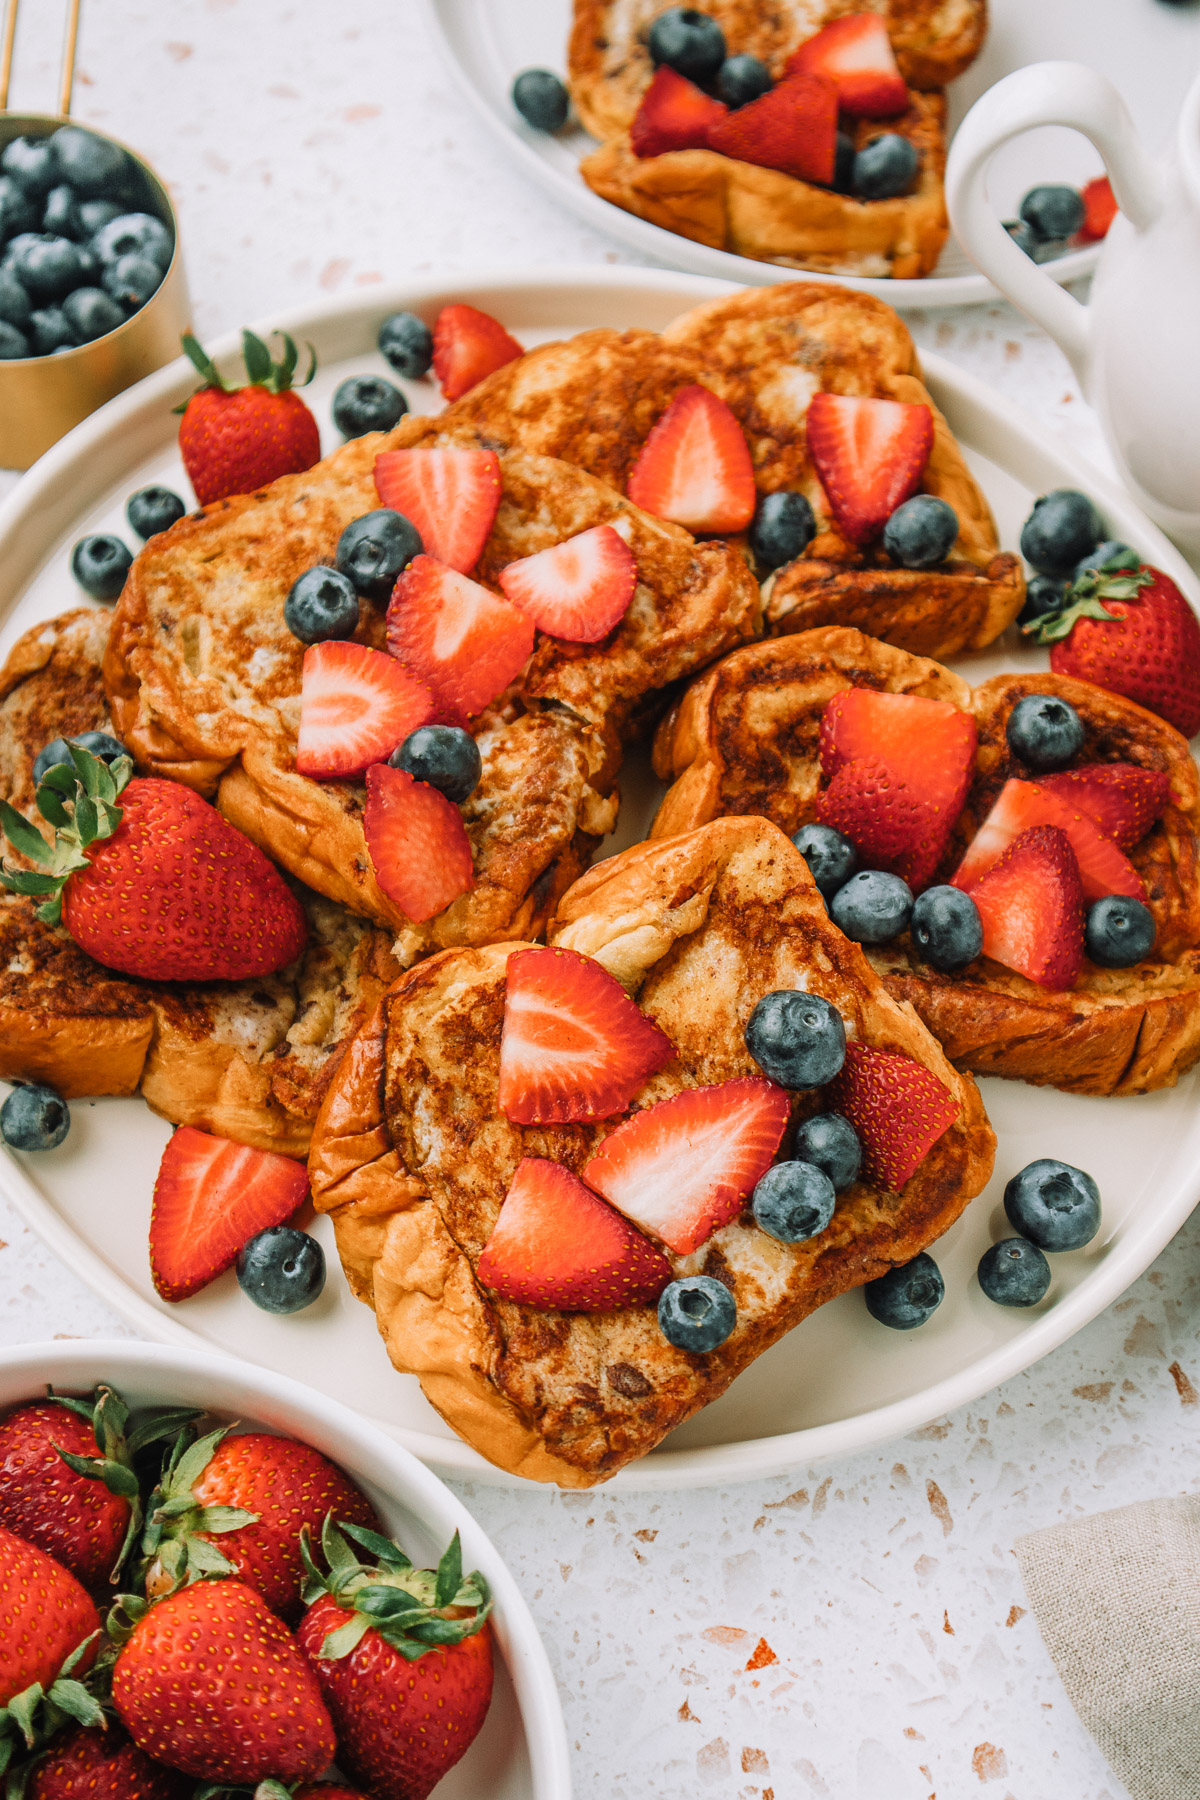 Delicious slices of brioche french toast stacked on a plate with fresh strawberries and blueberries for a yummy breakfast or brunch